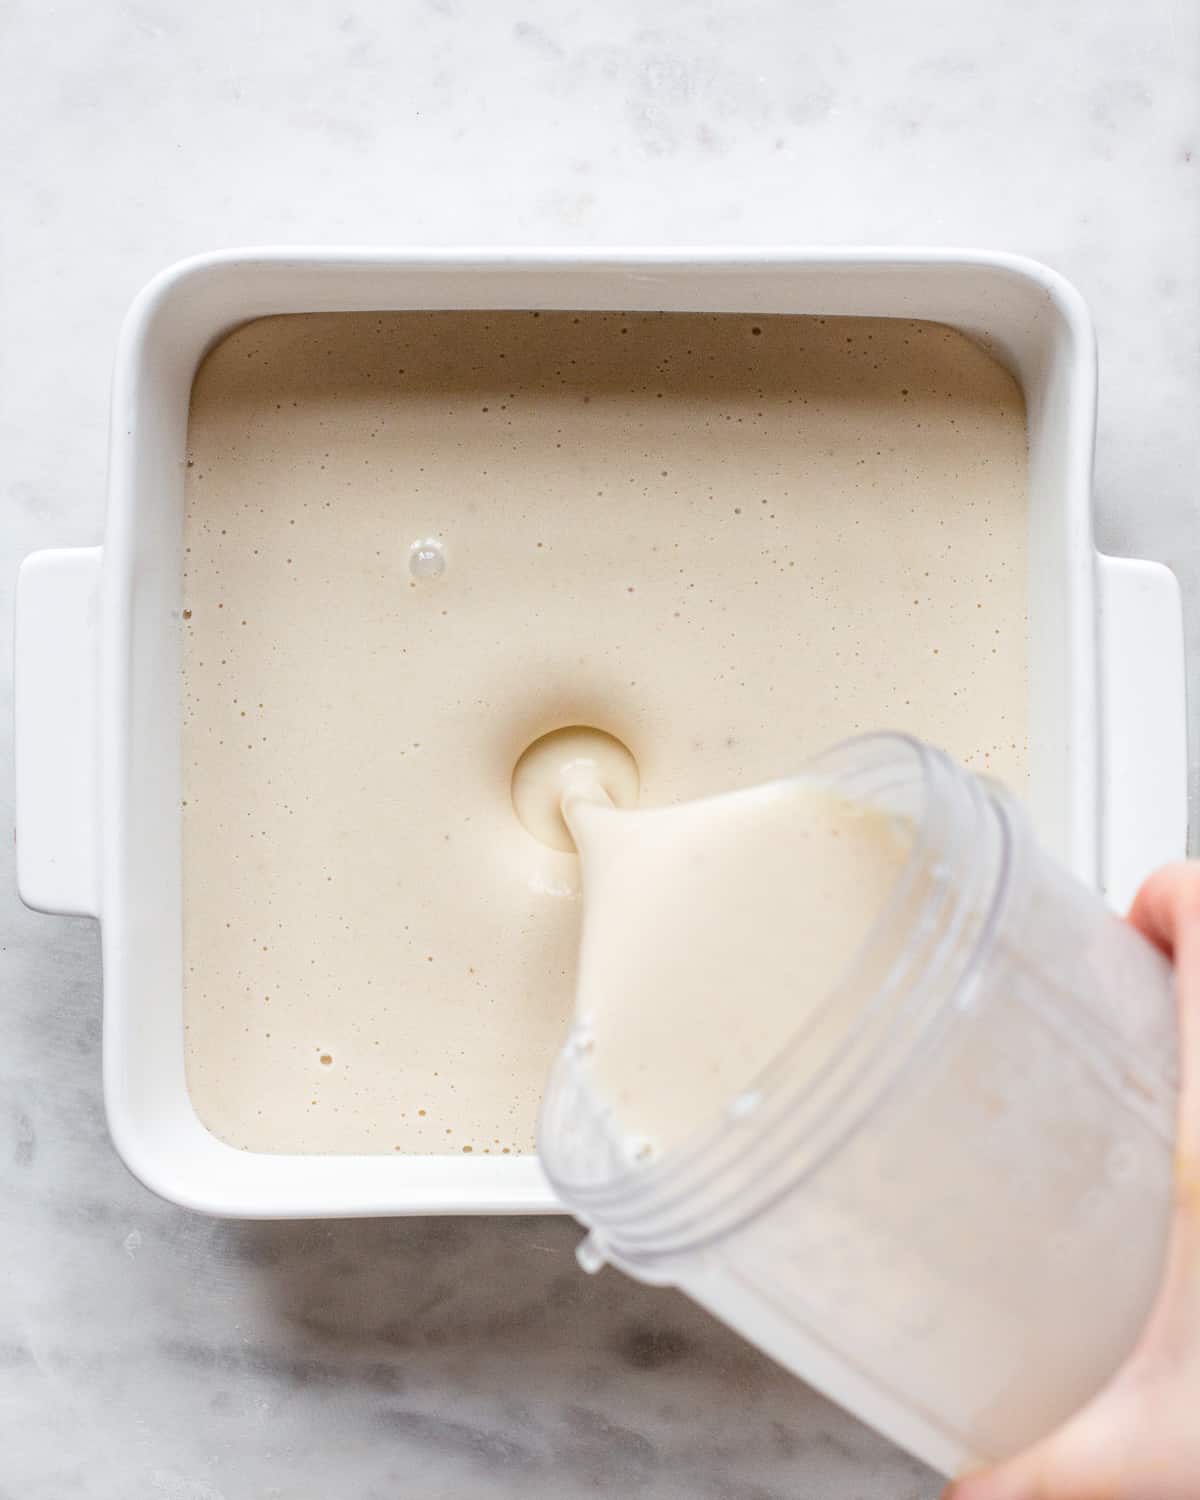 Hand pouring blended banana mixture into a white baking dish.